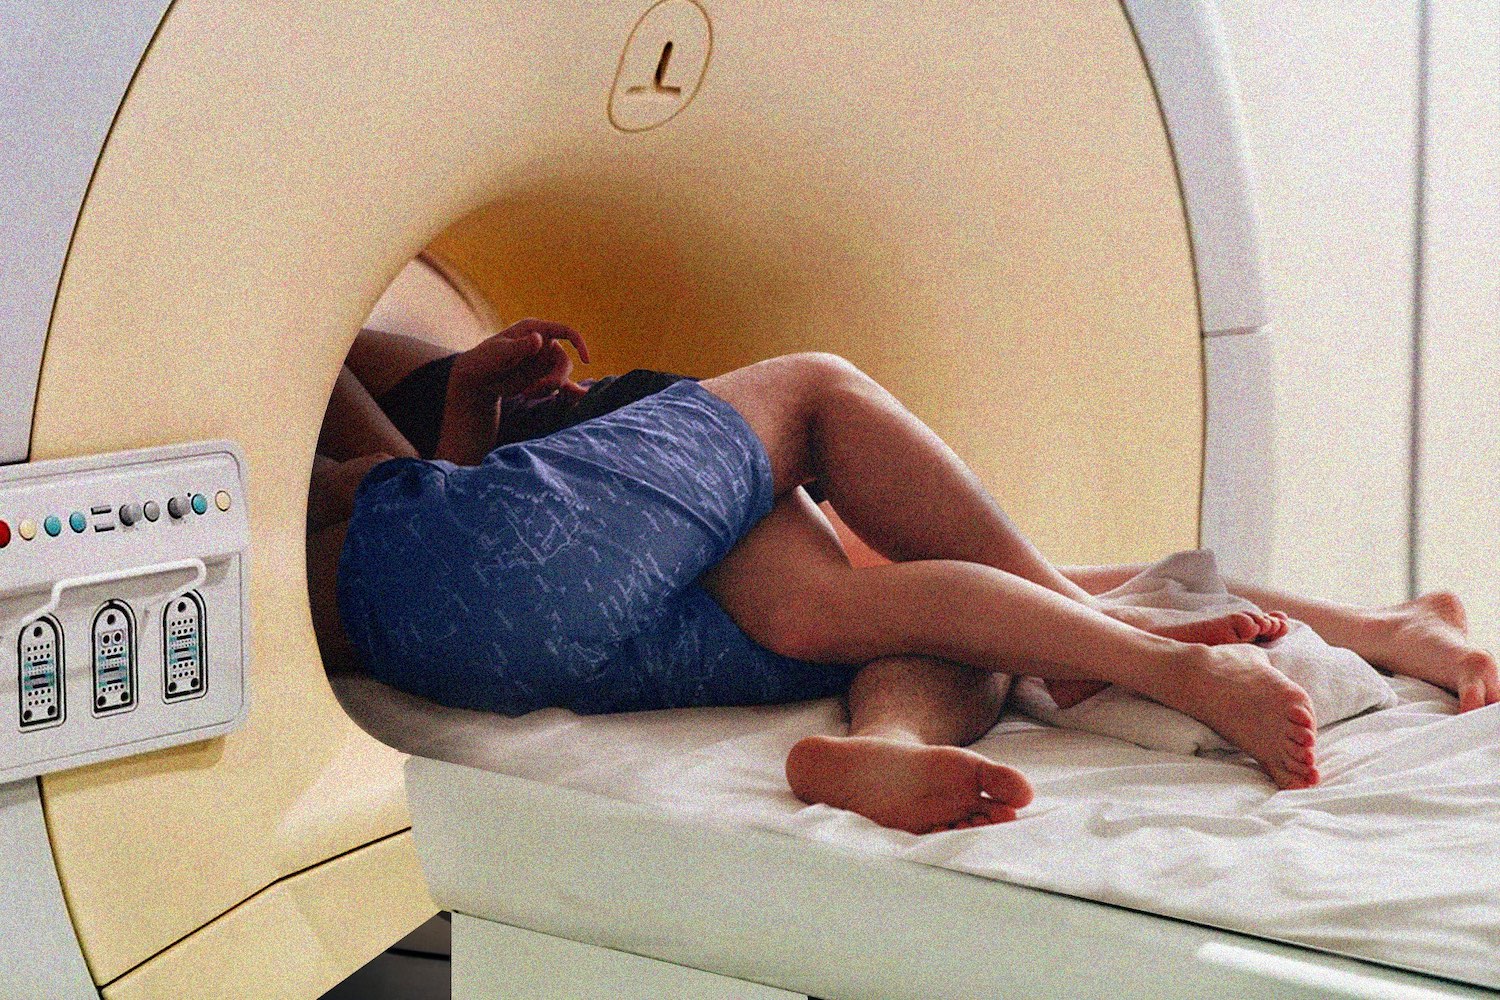 Viagra Pussy Effect - The Story of the Couple Who Shagged in an MRI Machine for Science ...